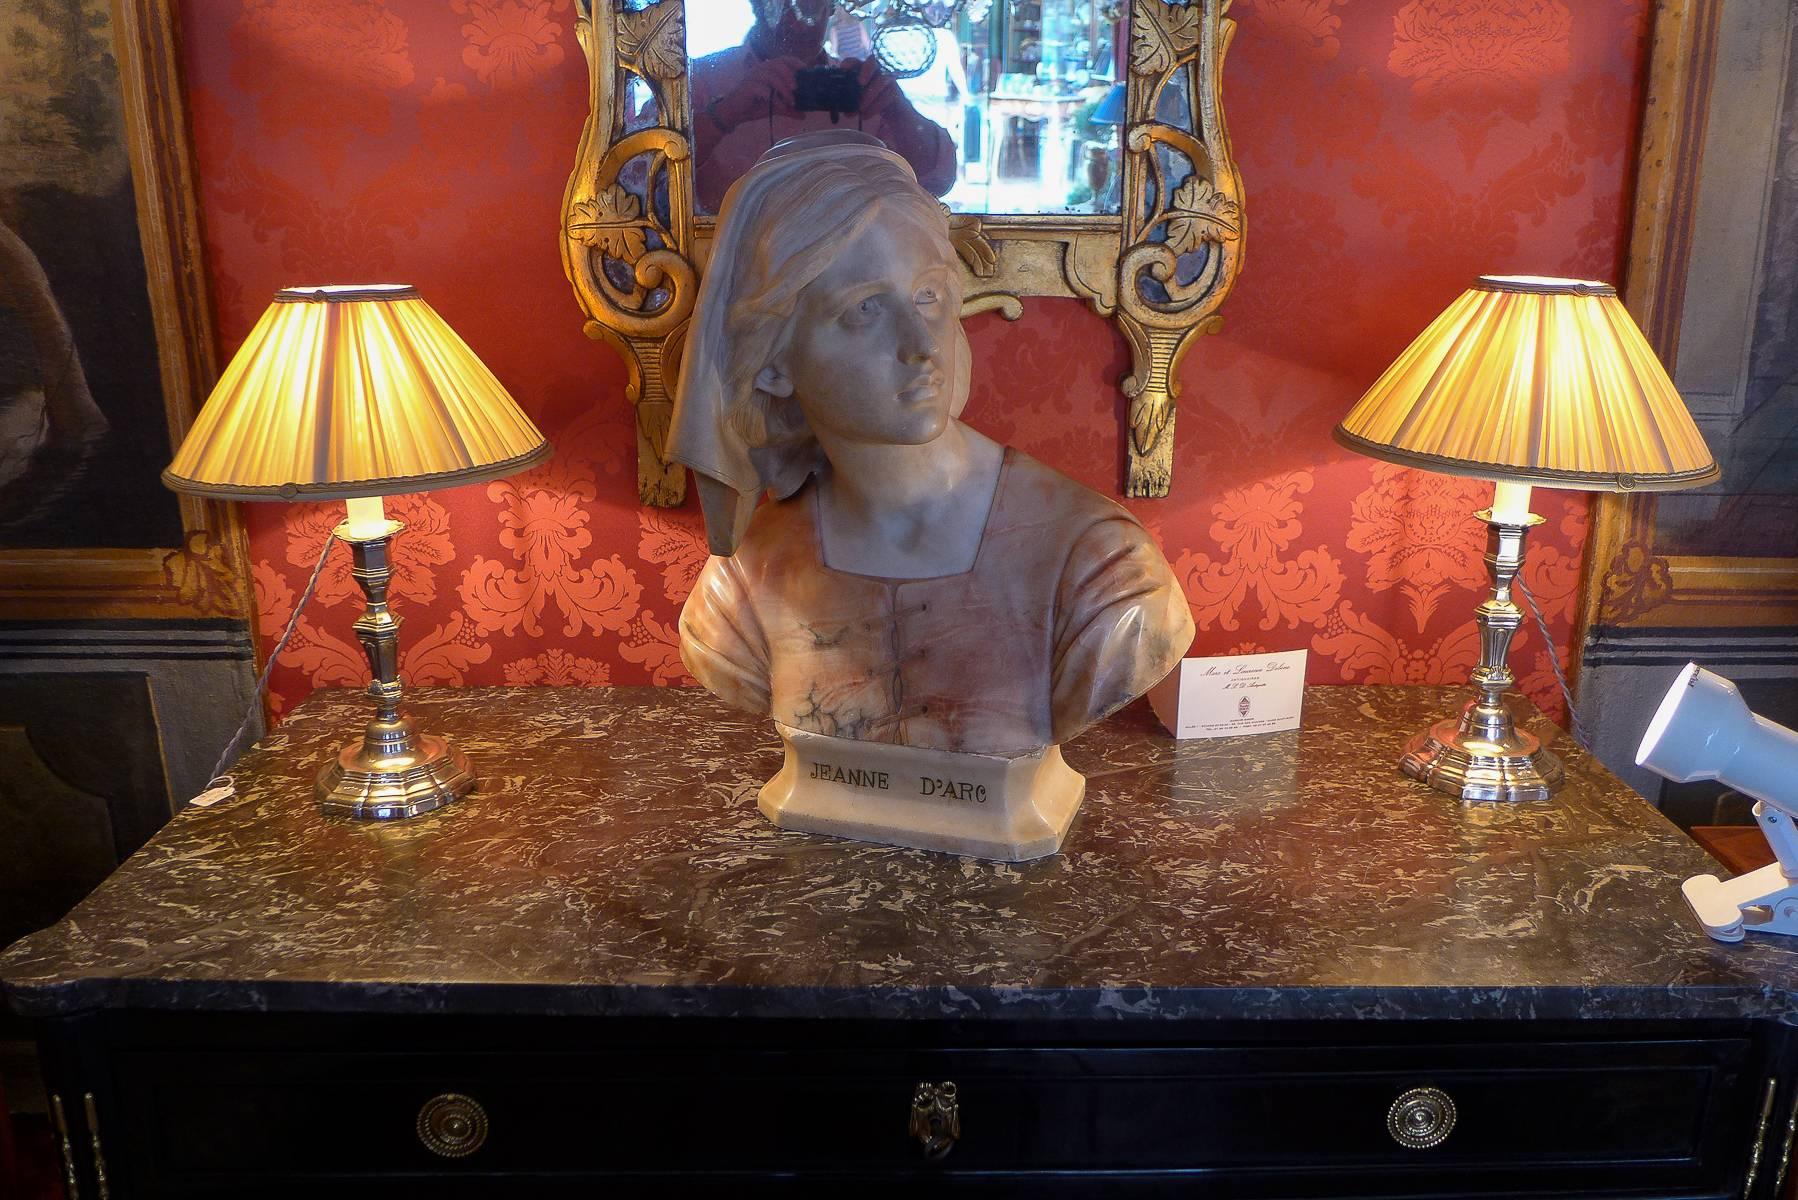 An elegant gorgeous marble and alabaster sculpture representing "Bust of Jeanne d’Arc" signed by Giuseppe Bessi (1857-1922) Italian sculptor. The sculpture rest on a marble base.

Giuseppe Bessi was the director of the Volterra Art